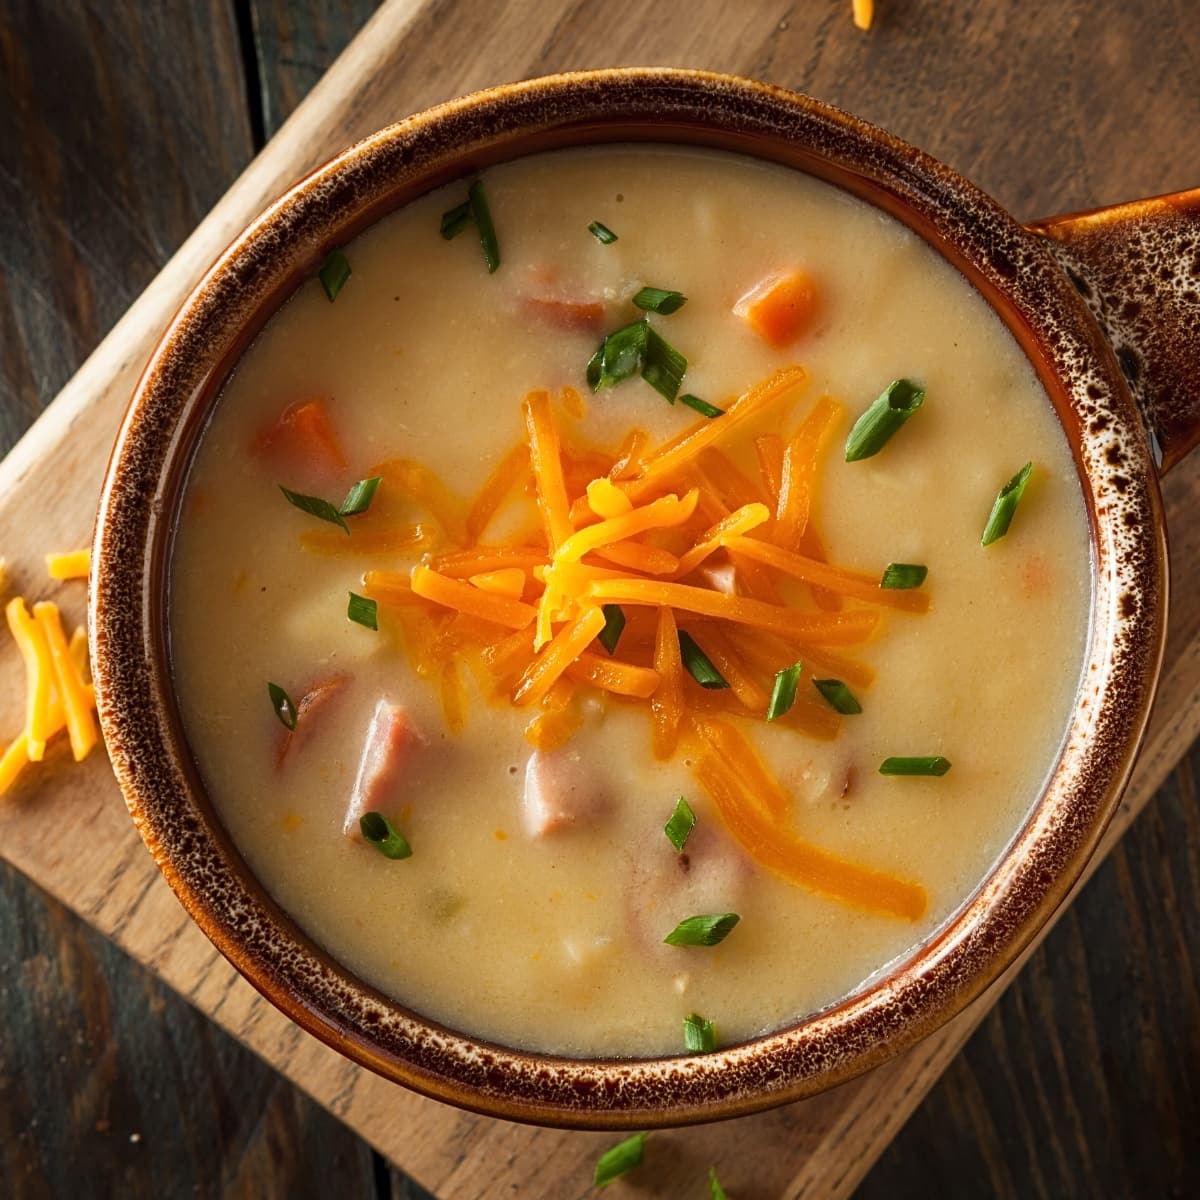 Beer cheese soup with cheddar cheese and chives served on a wooden bowl.